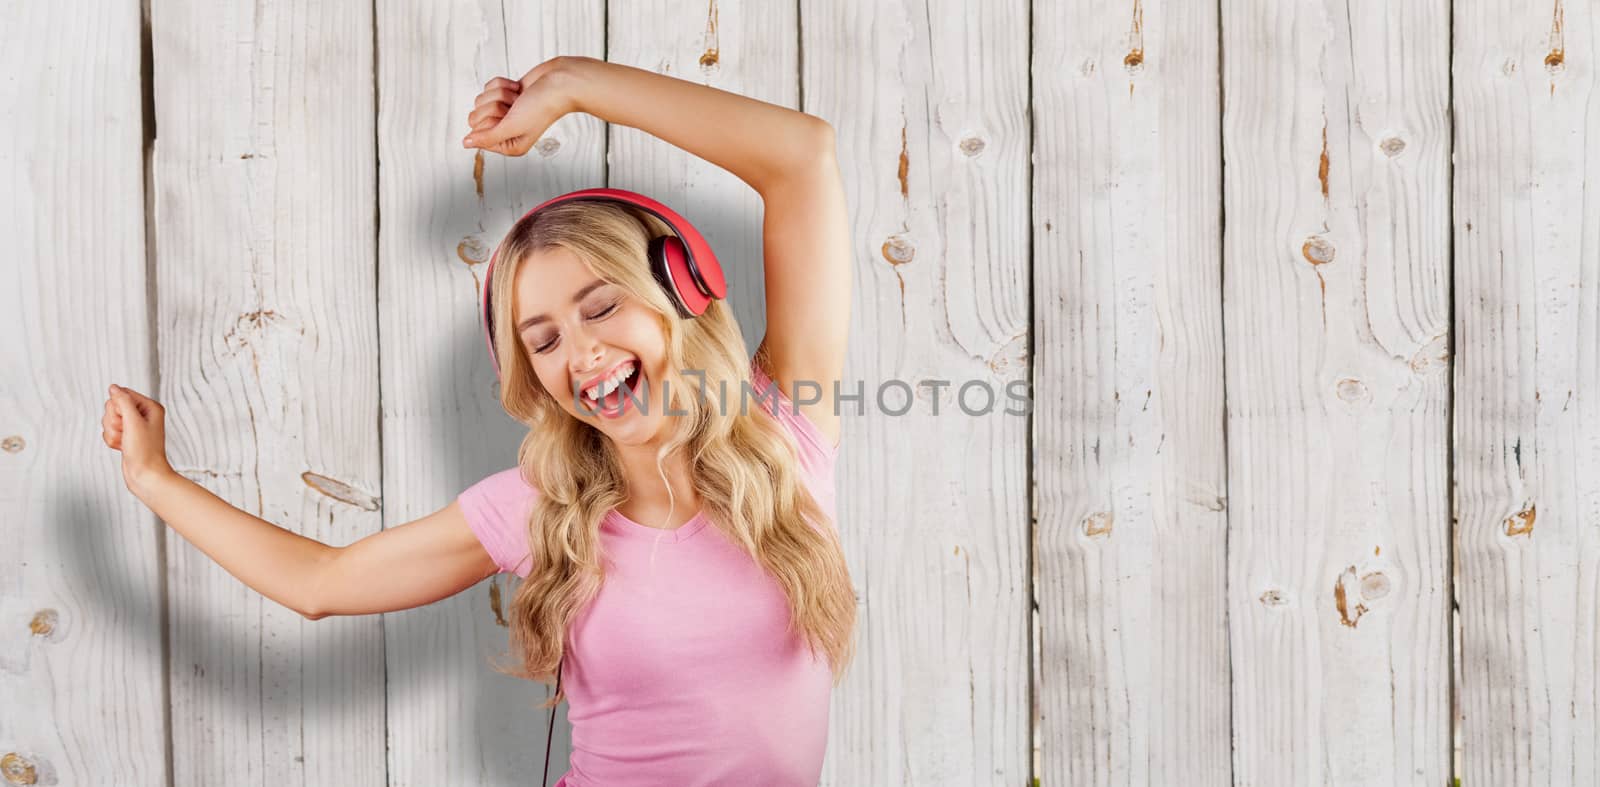 Beautiful woman dancing with headphones against wooden background